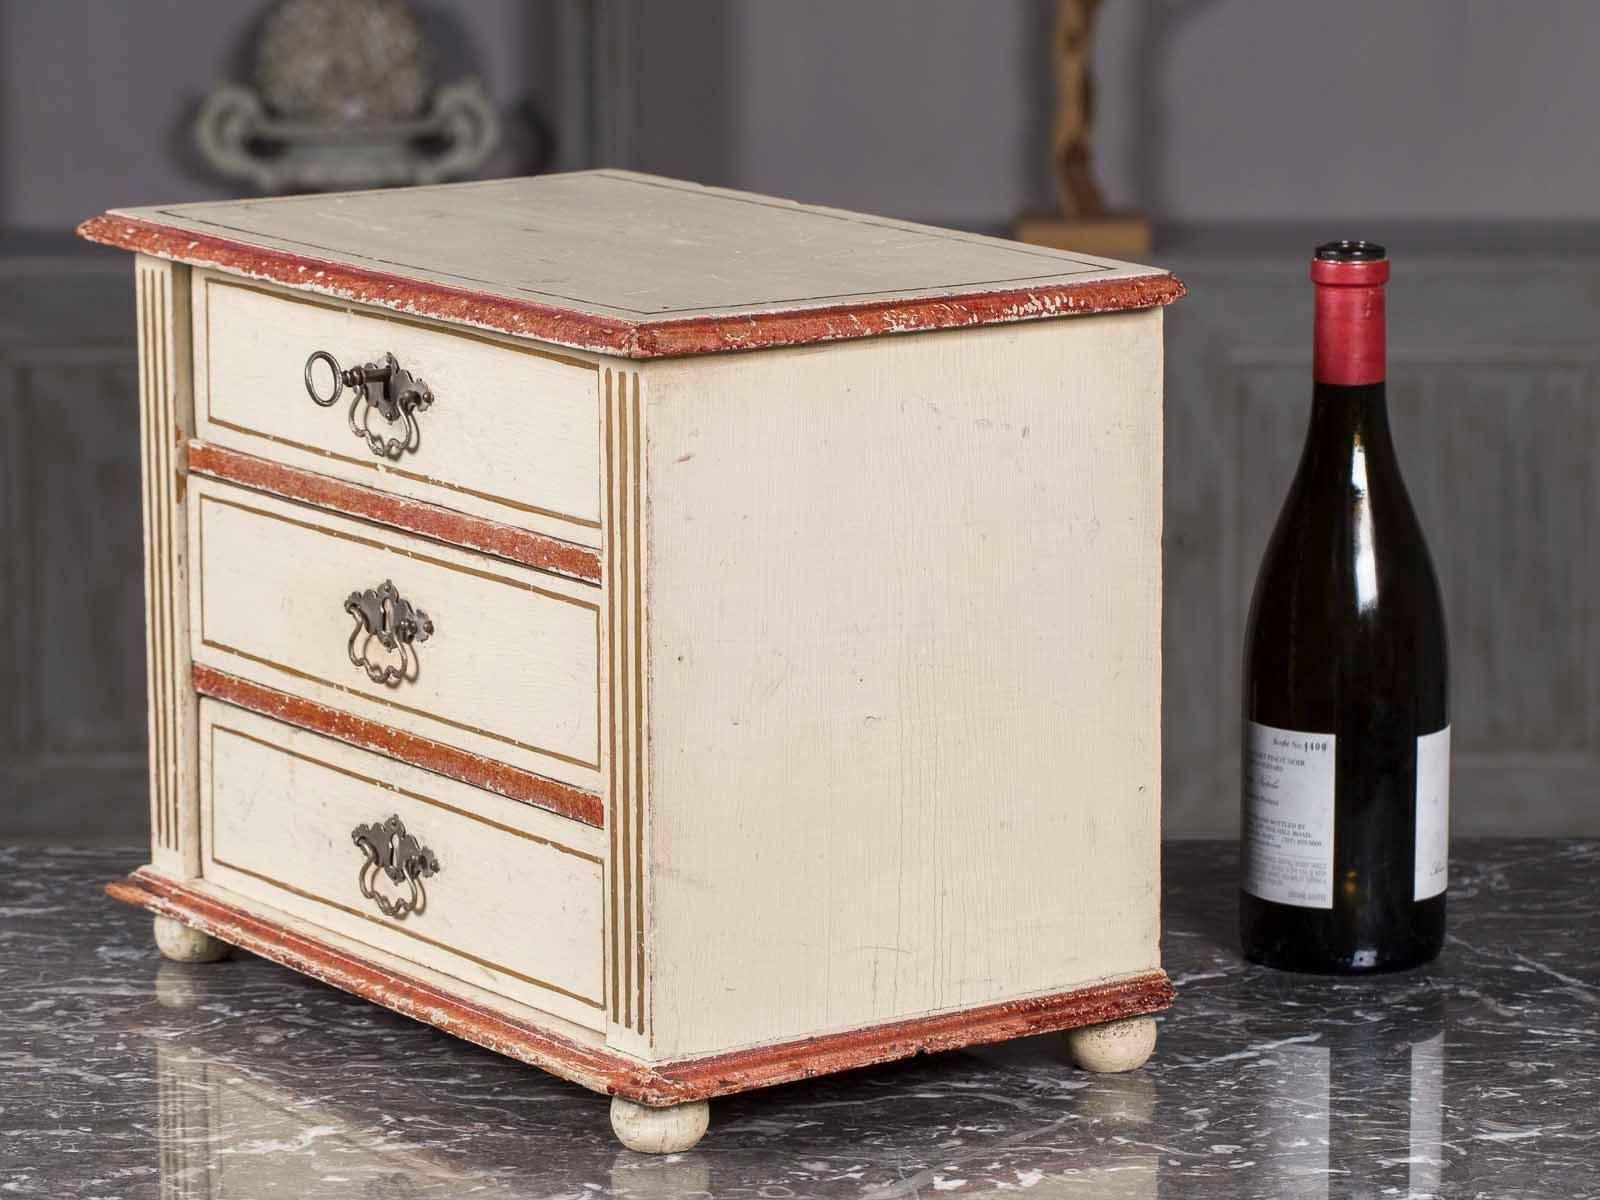 This charming example of an antique French miniature chest of drawers circa 1890 was used as a sample from which to order a full size chest for one's home. Fitted with three drawers, a working lock, elevated on bun feet and featuring a charming